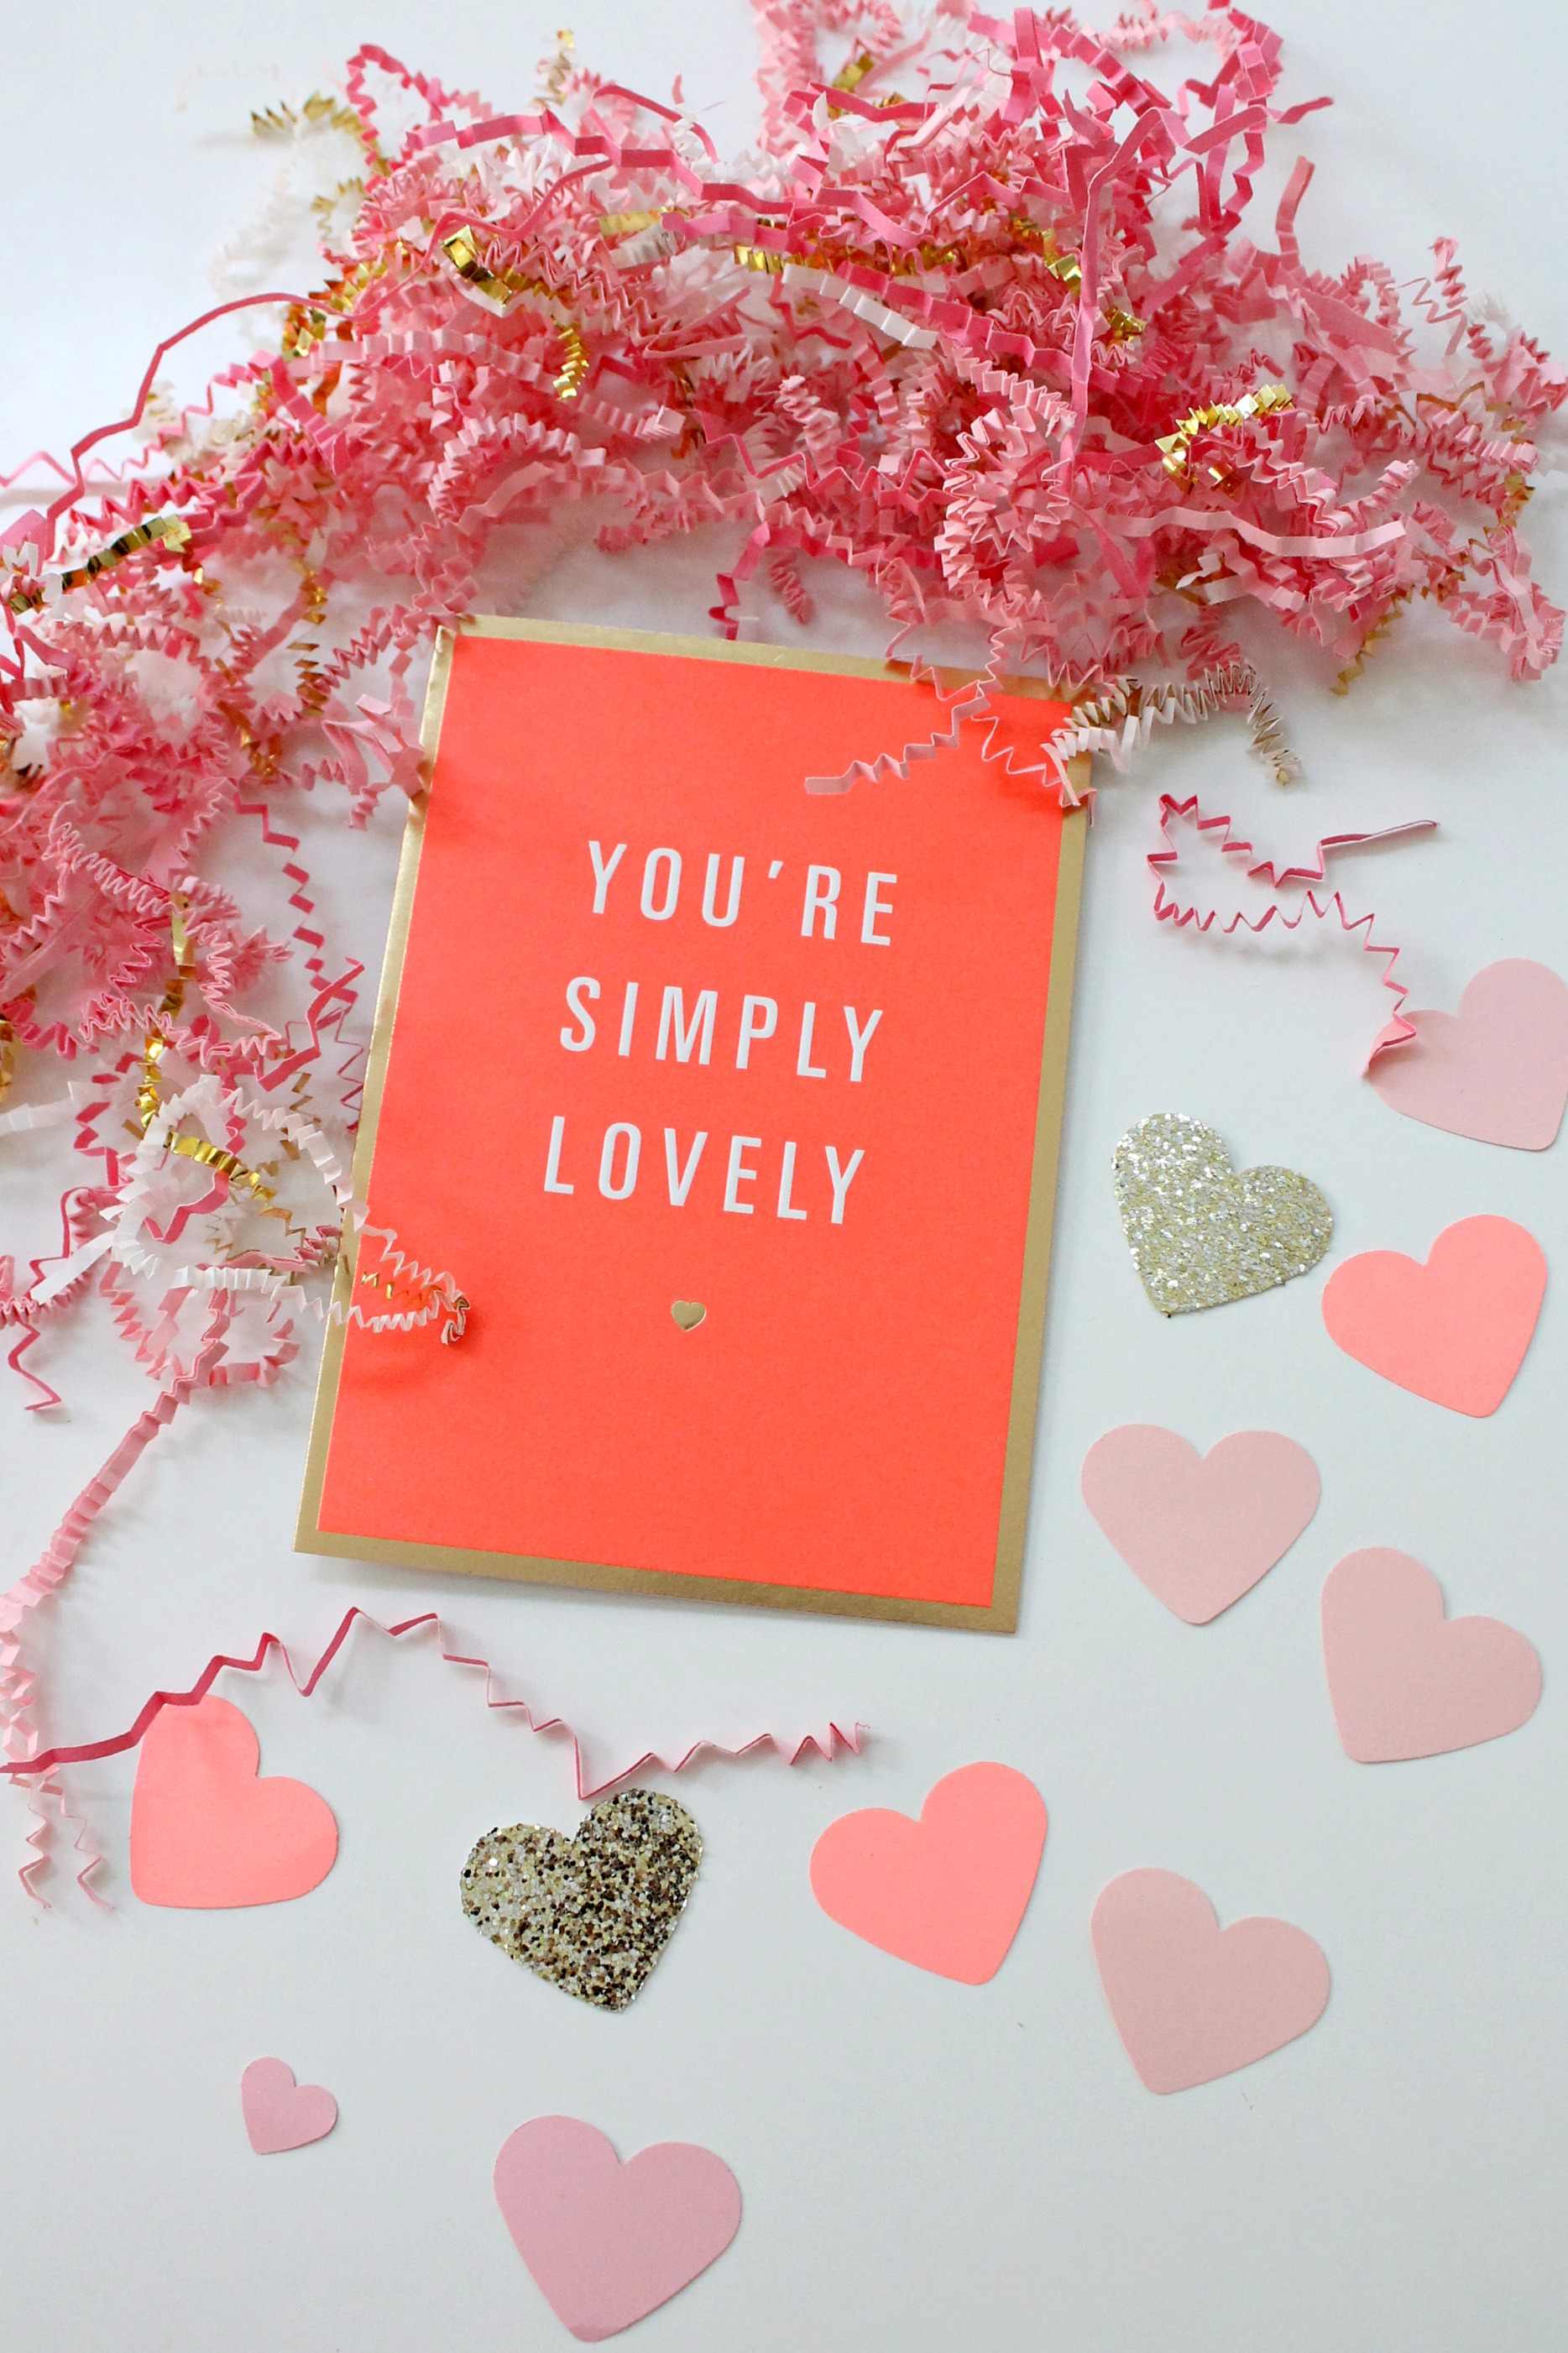 Valentine's-day-card-by-Lagom-design-Styling-and-photograph-by-Geraldine-Little-Big-Bell